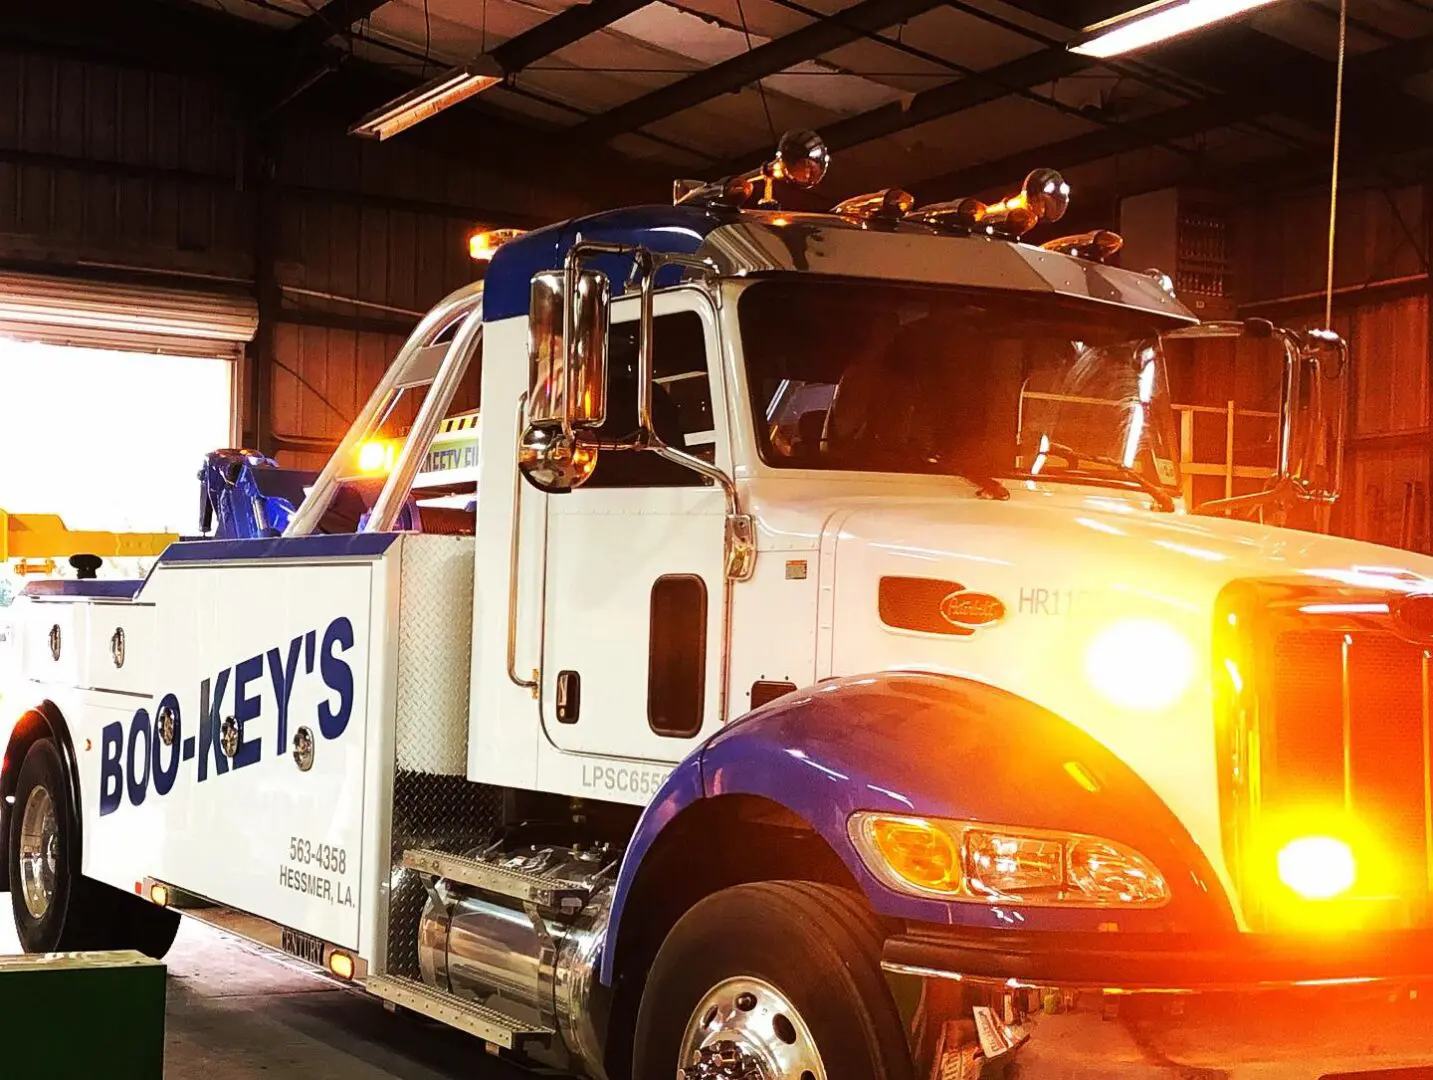 Boo-Key's Wrecker Service Tow Truck Wrap, Lettering, Decals & Graphics, Hessmer, Louisiana, HLA Signs